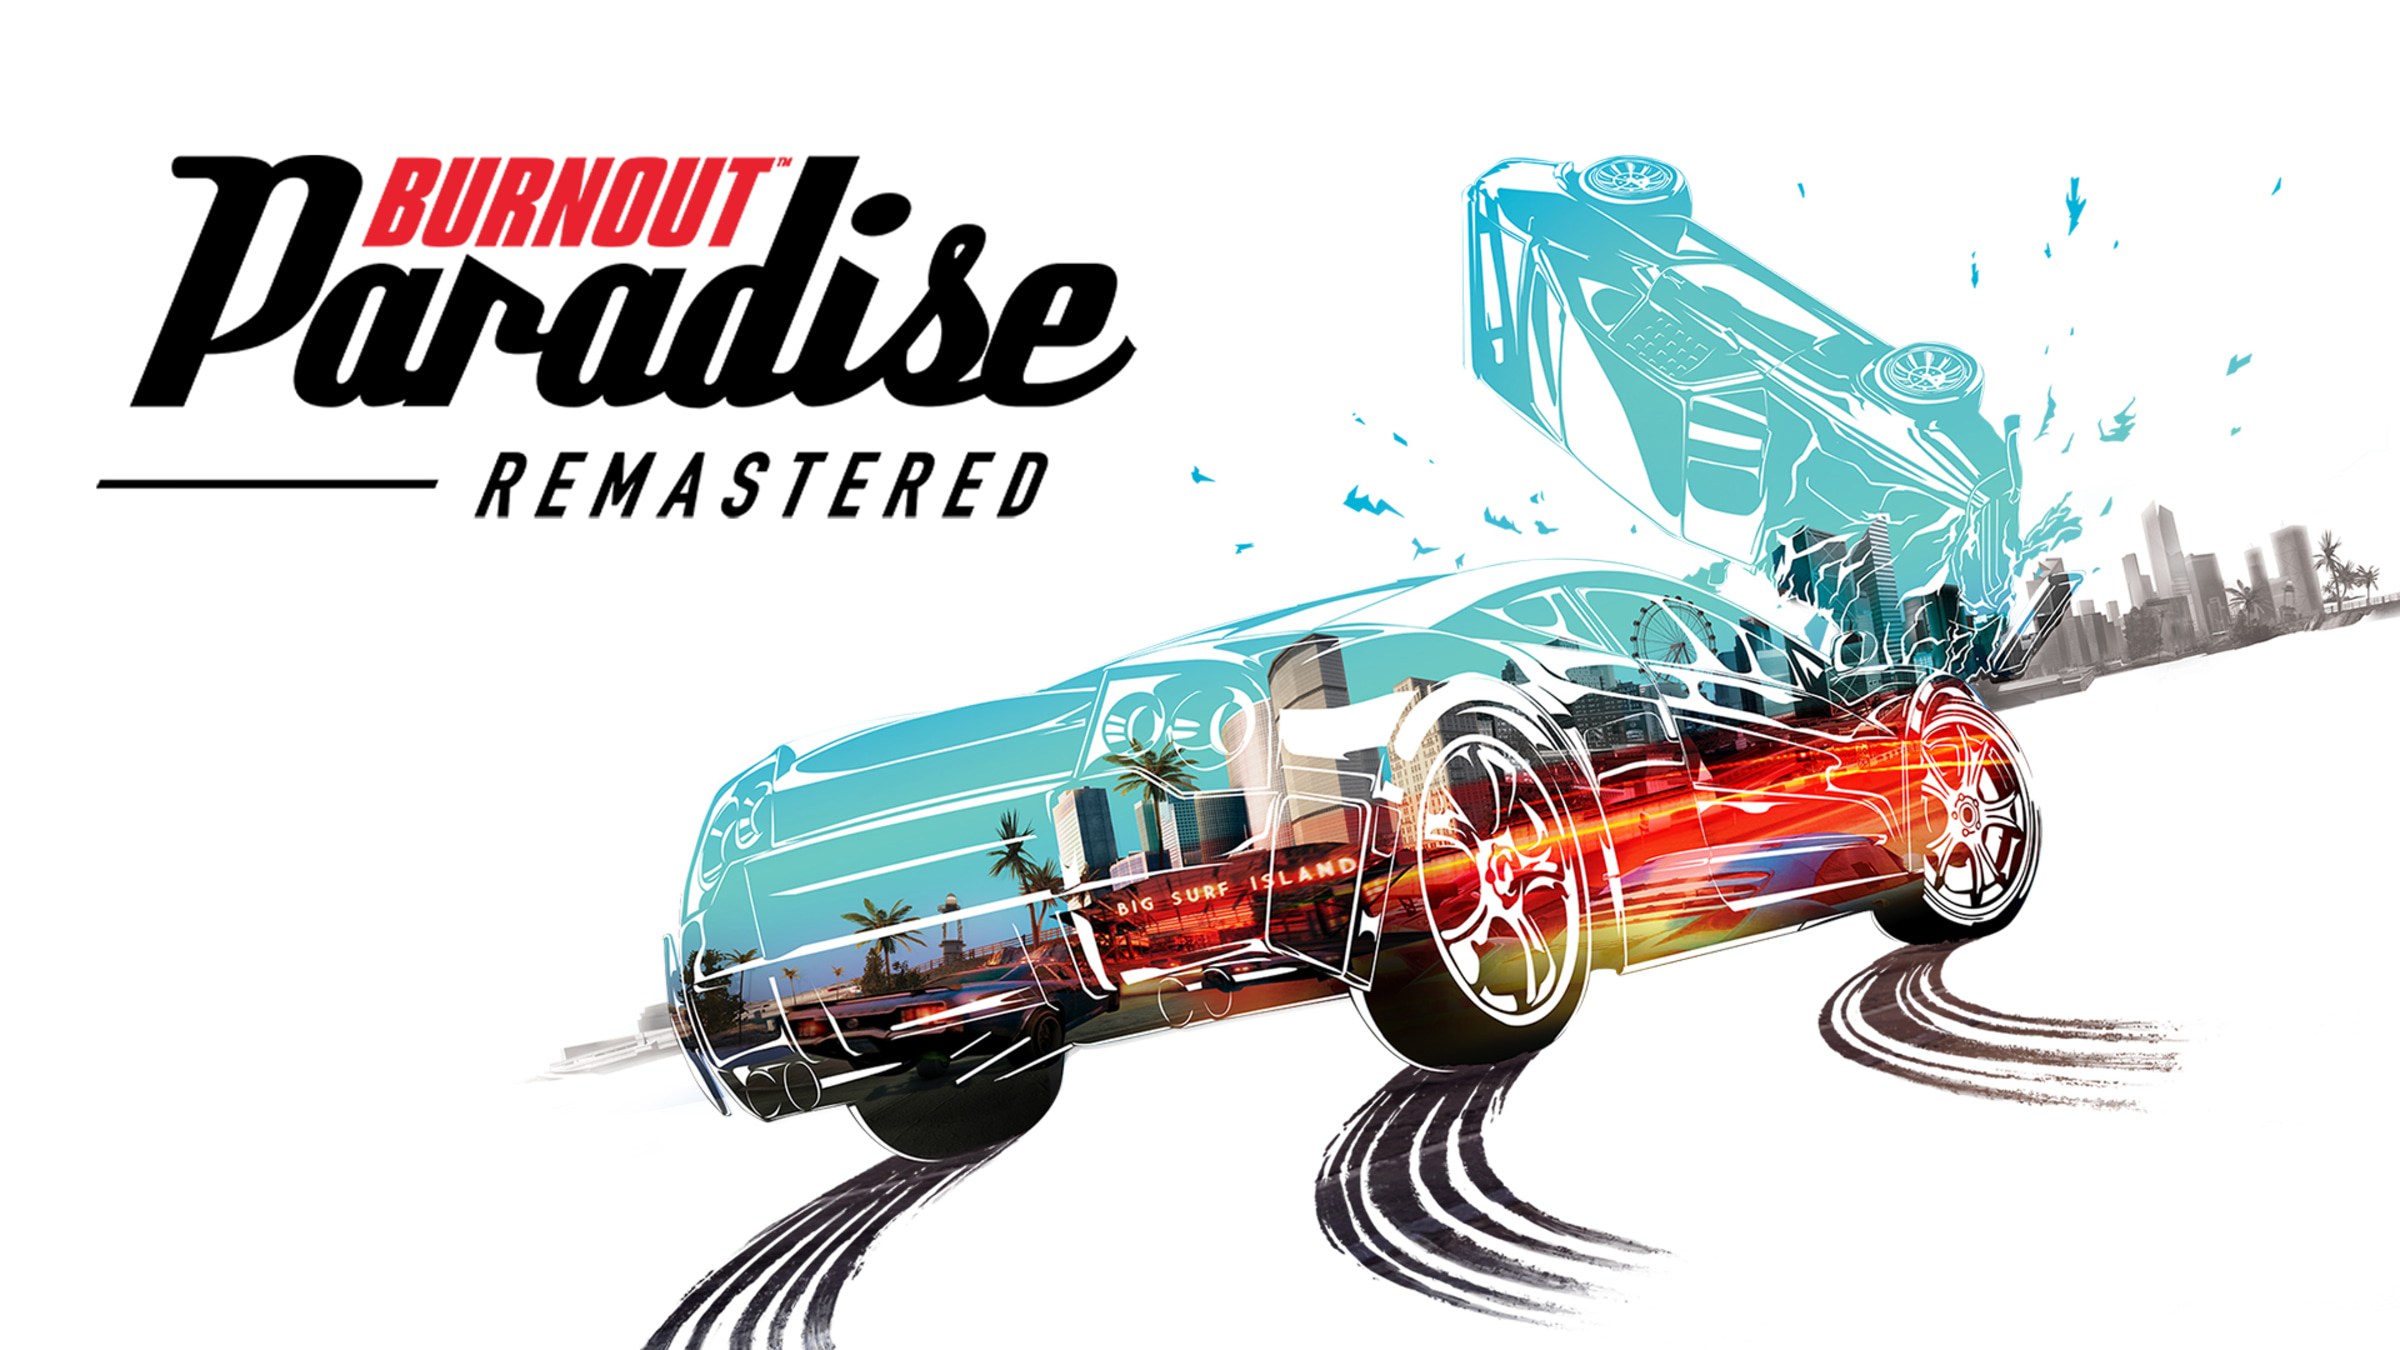 Burnout™ Paradise Remastered for Nintendo Switch - Nintendo Official Site $9.89